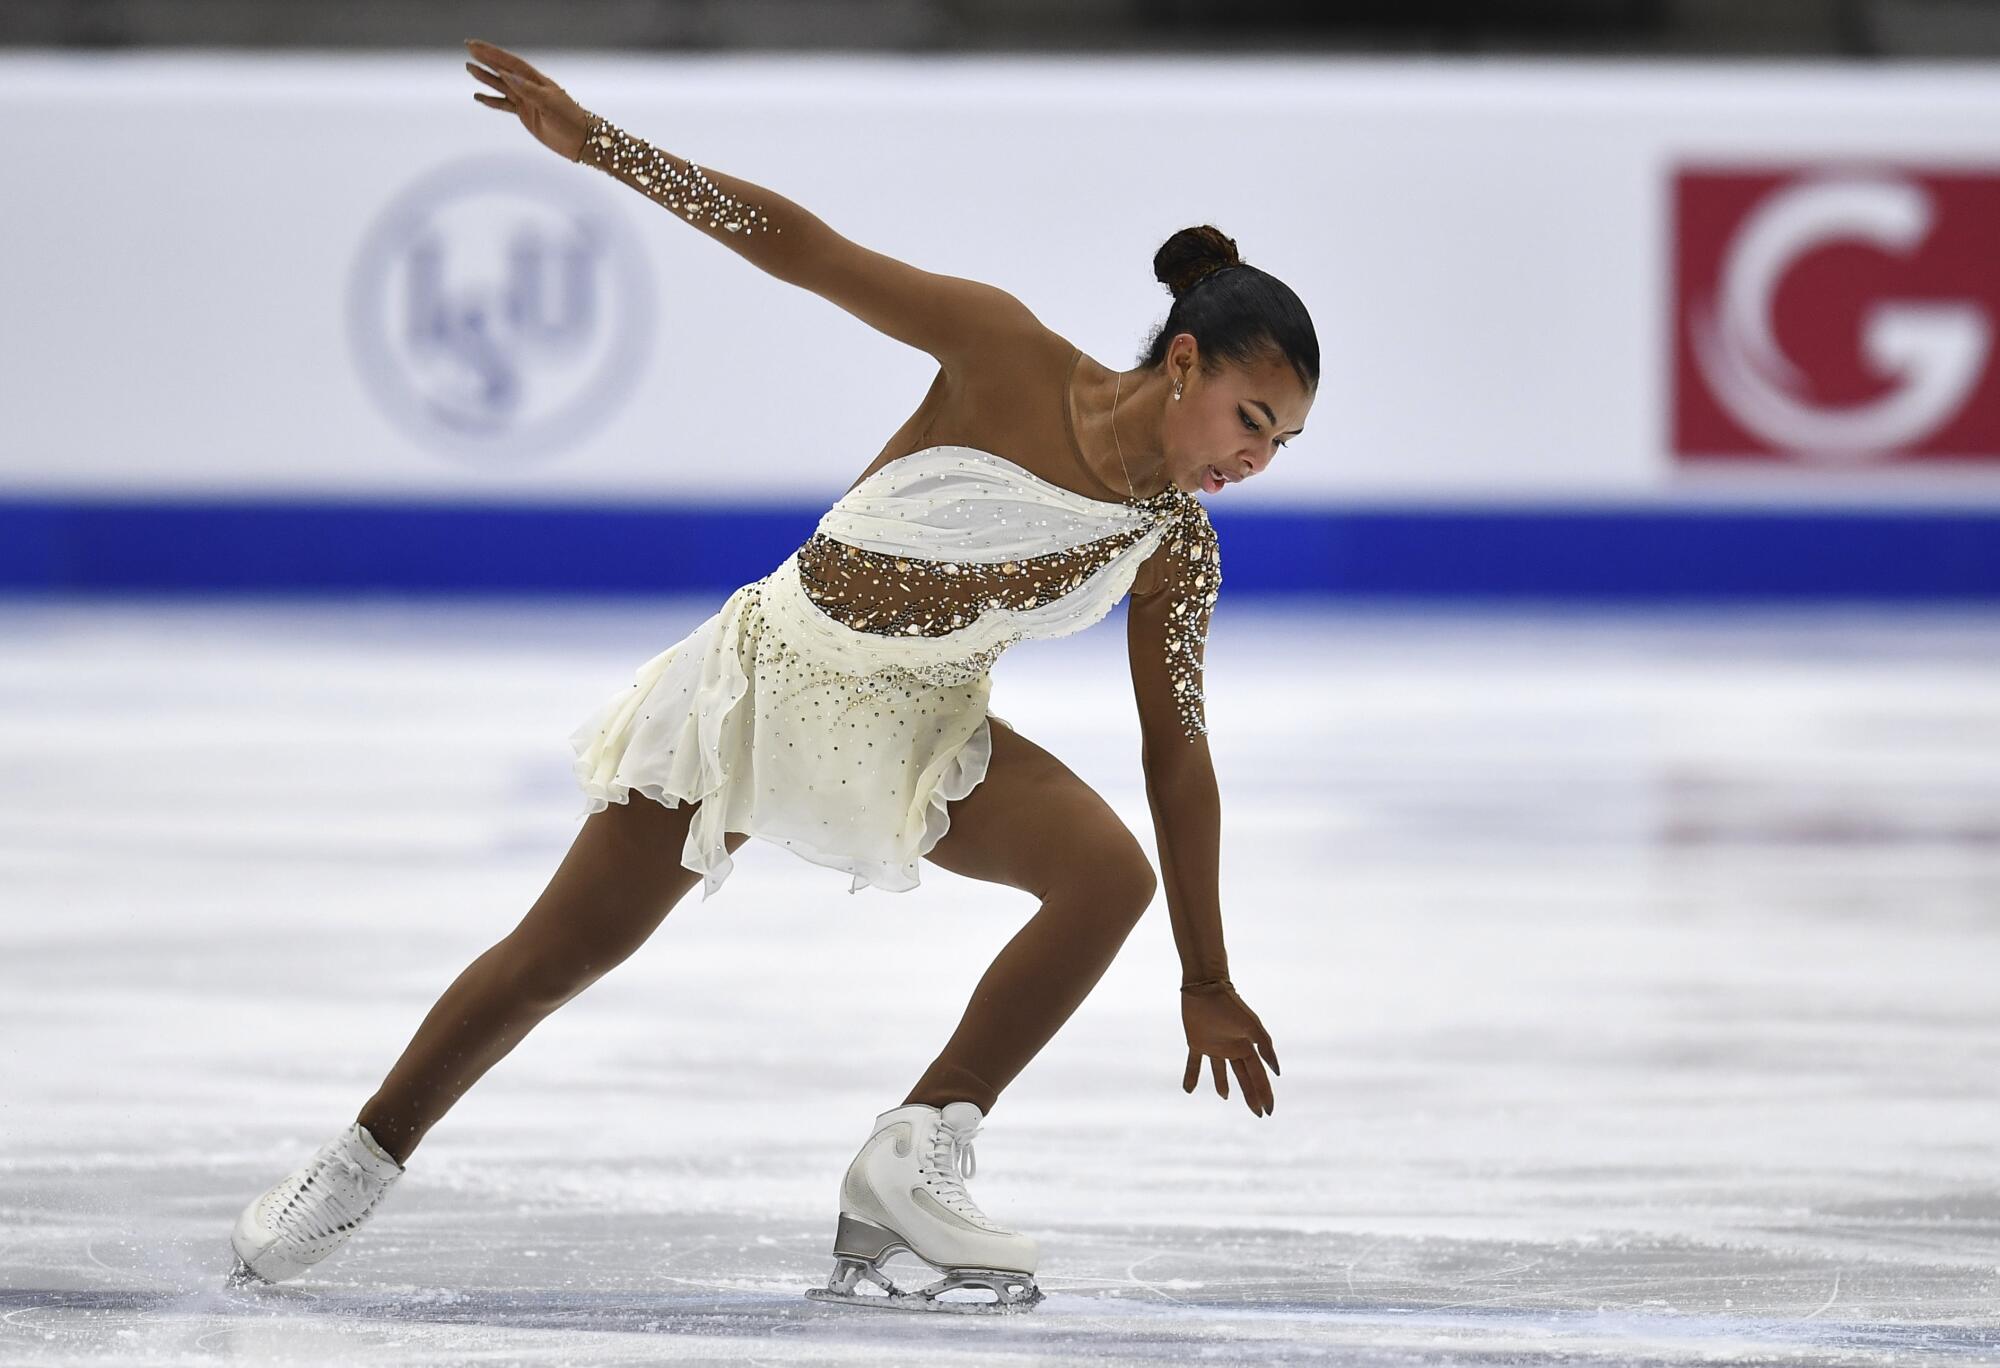 Starr Andrews performs at the ISU Four Continents figure skating championships Jan. 22 in Tallinn, Estonia.